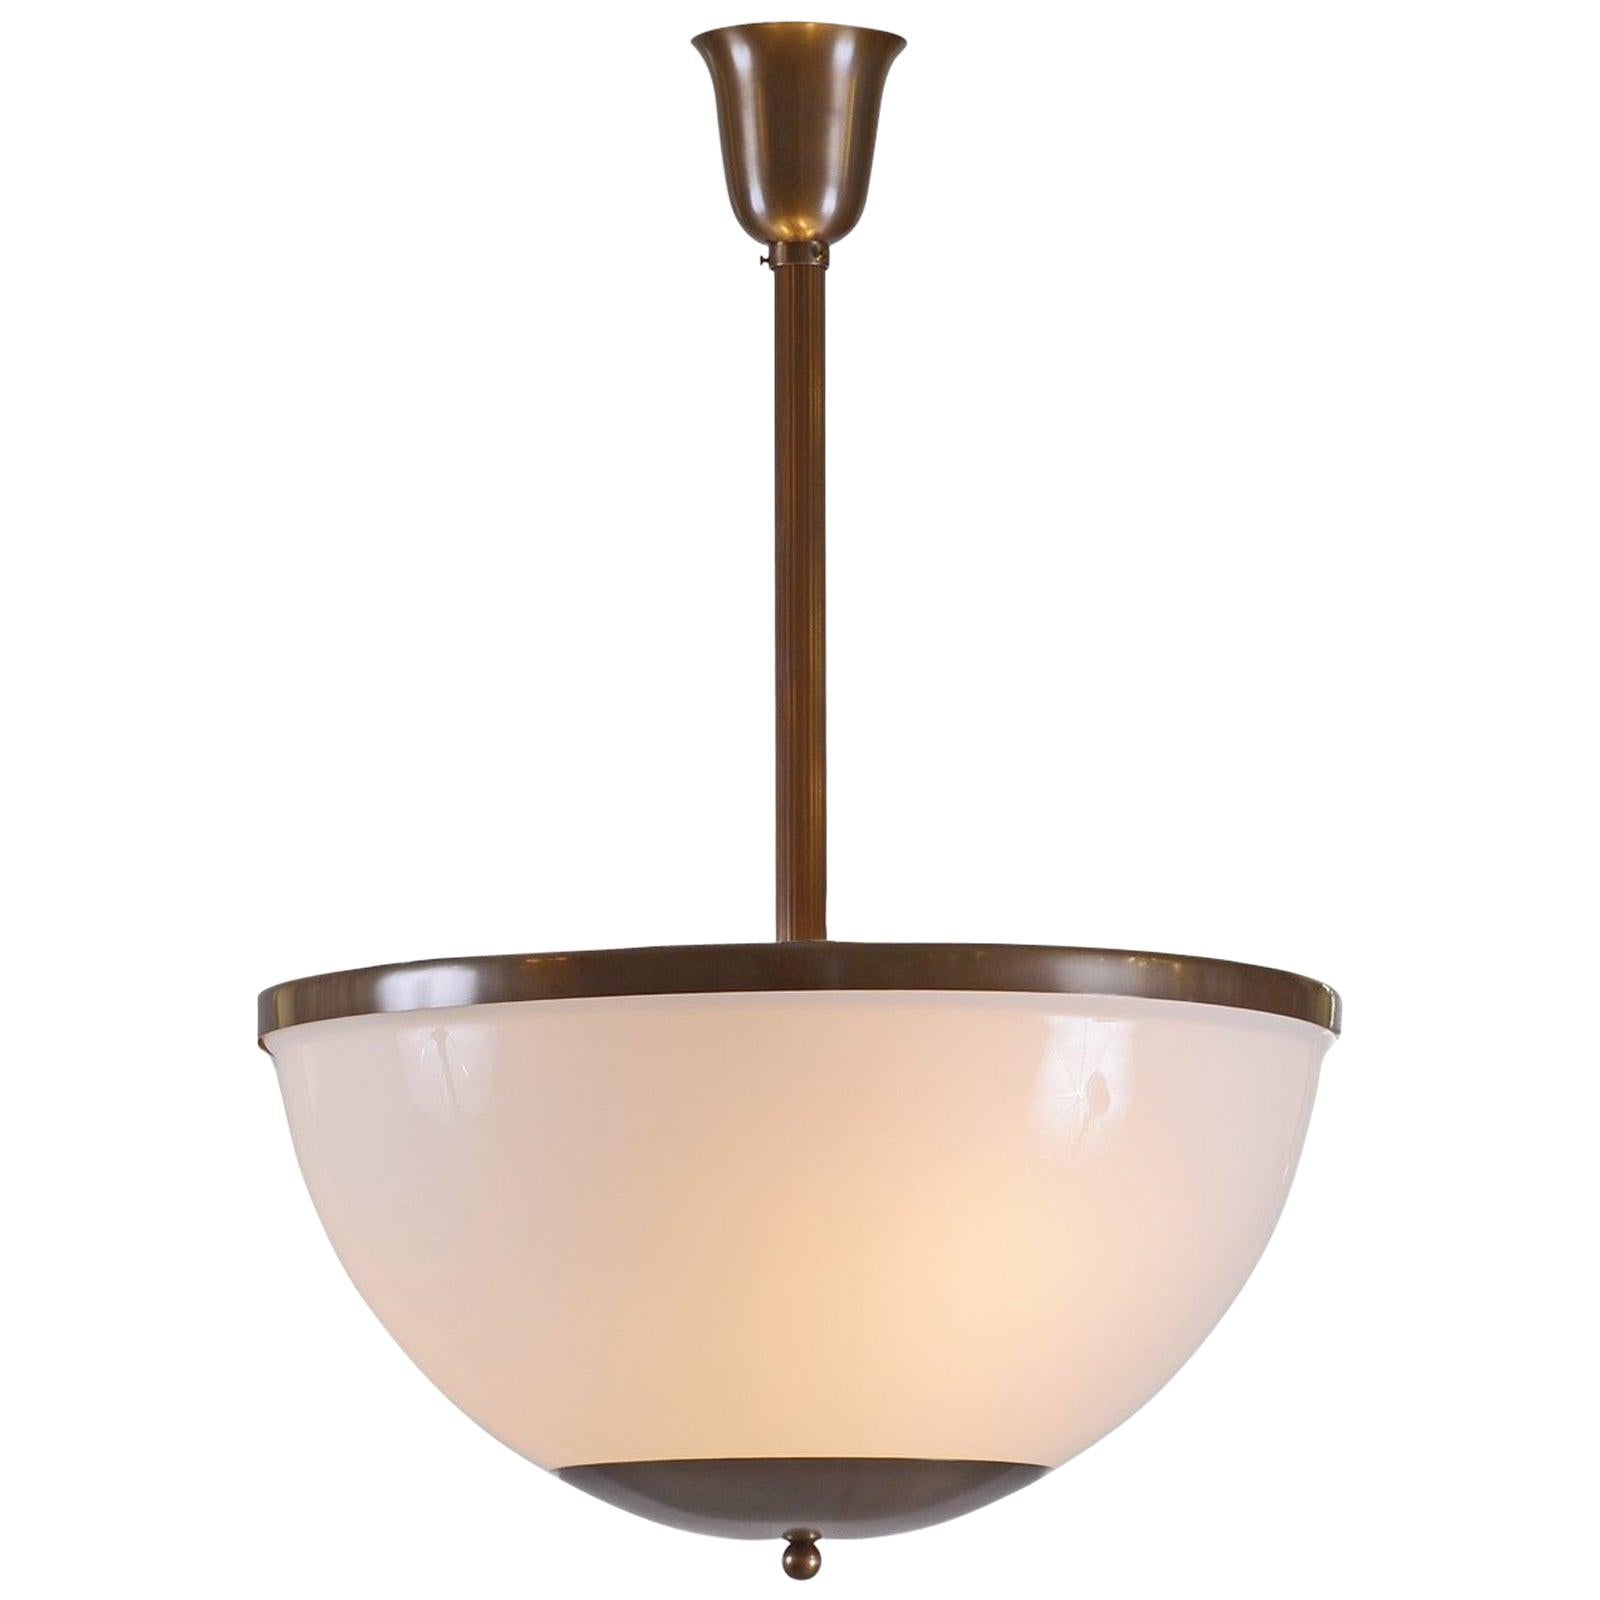 Ceiling light with opaline glass shade, different sizes, comes as well as a downlight

Total drop custom made

All components according to the UL regulations, with an additional charge we will UL-list and label our fixtures.